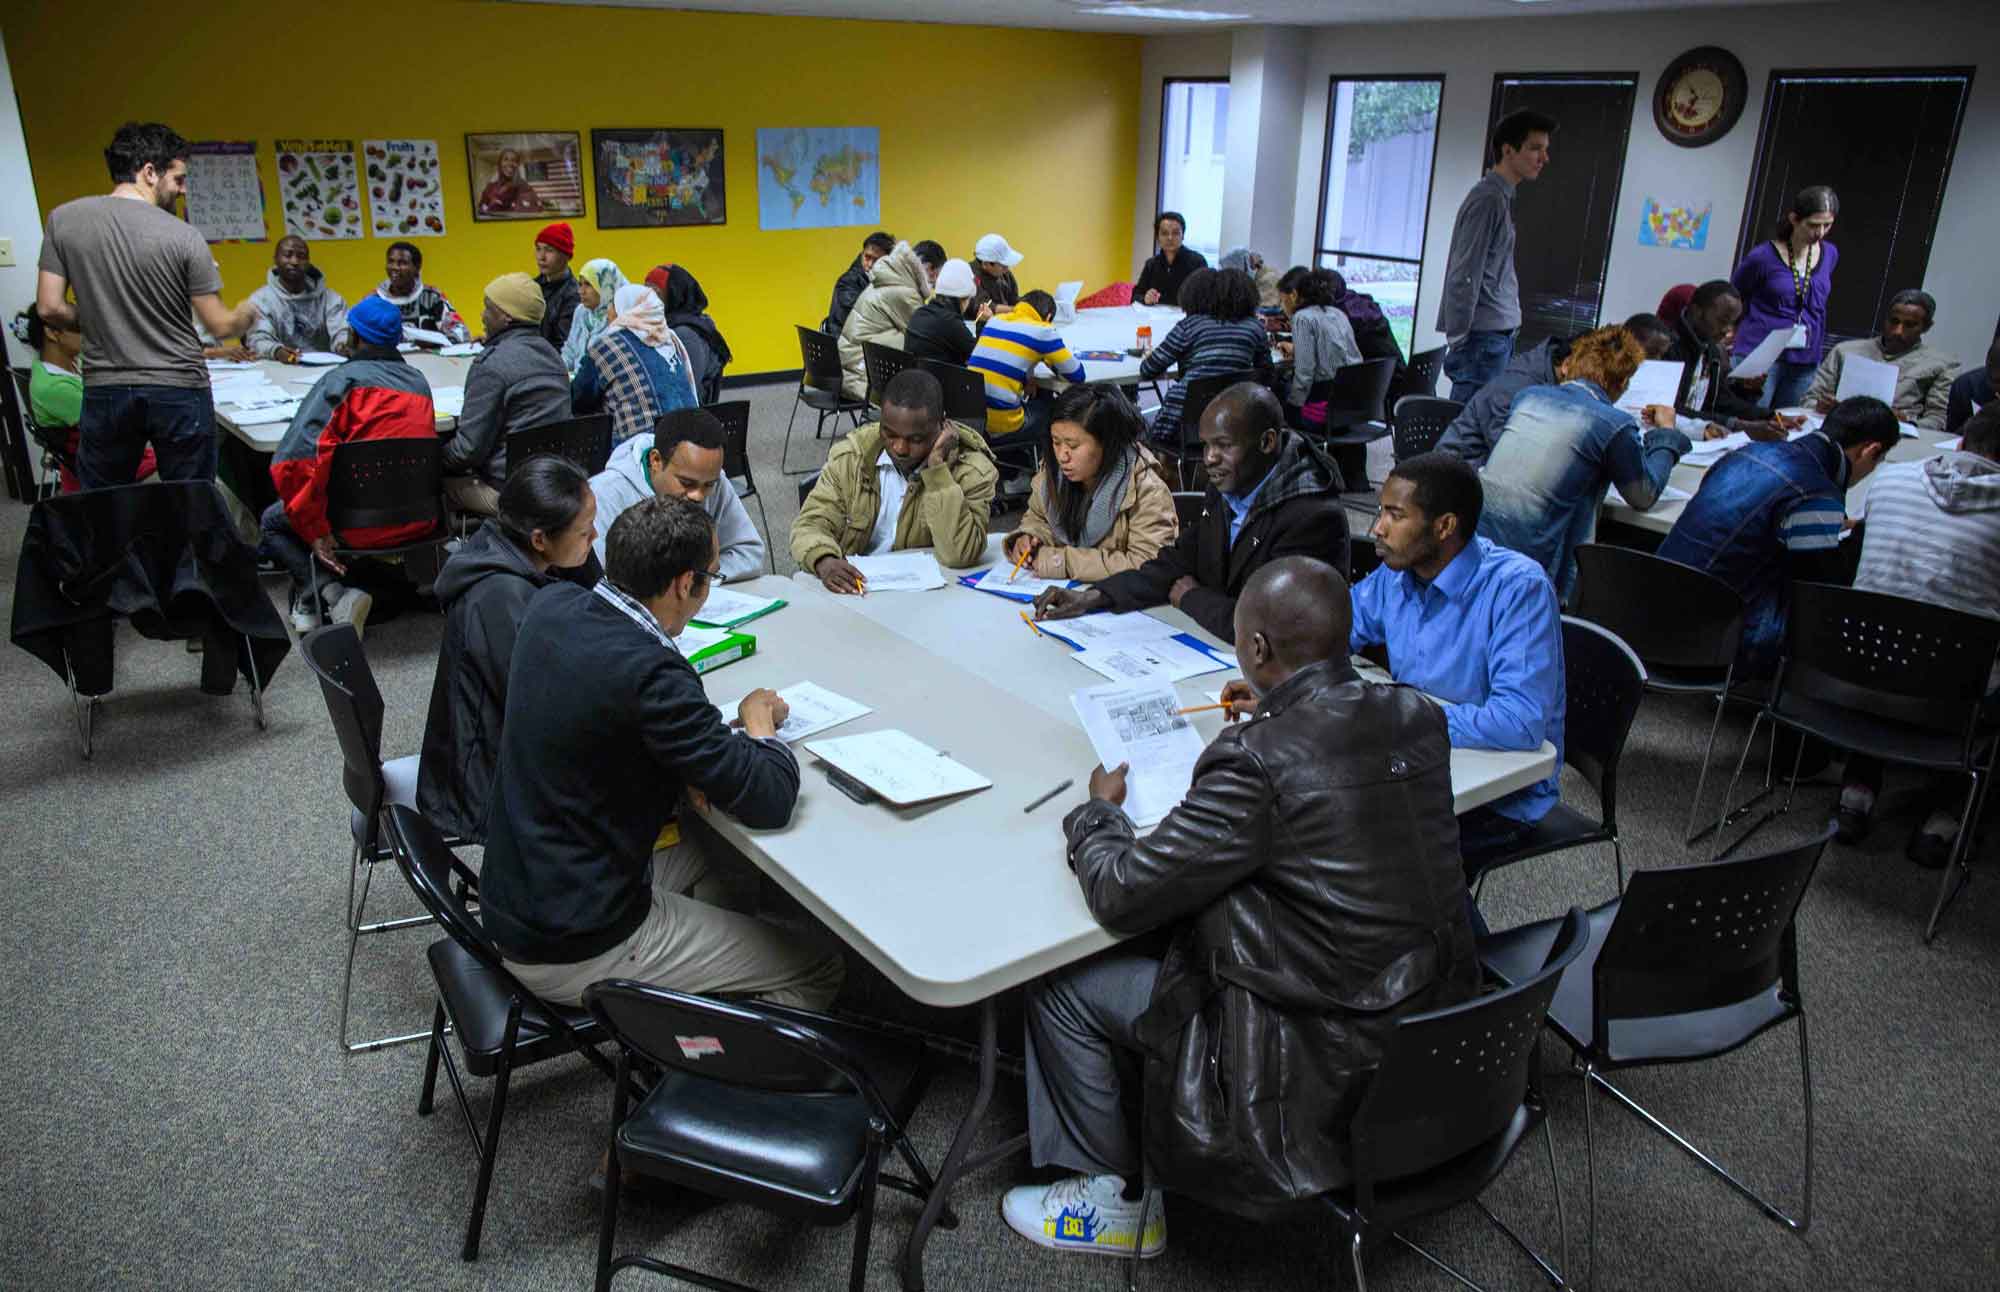 Resettled refugees learning English during a cultural orientation class